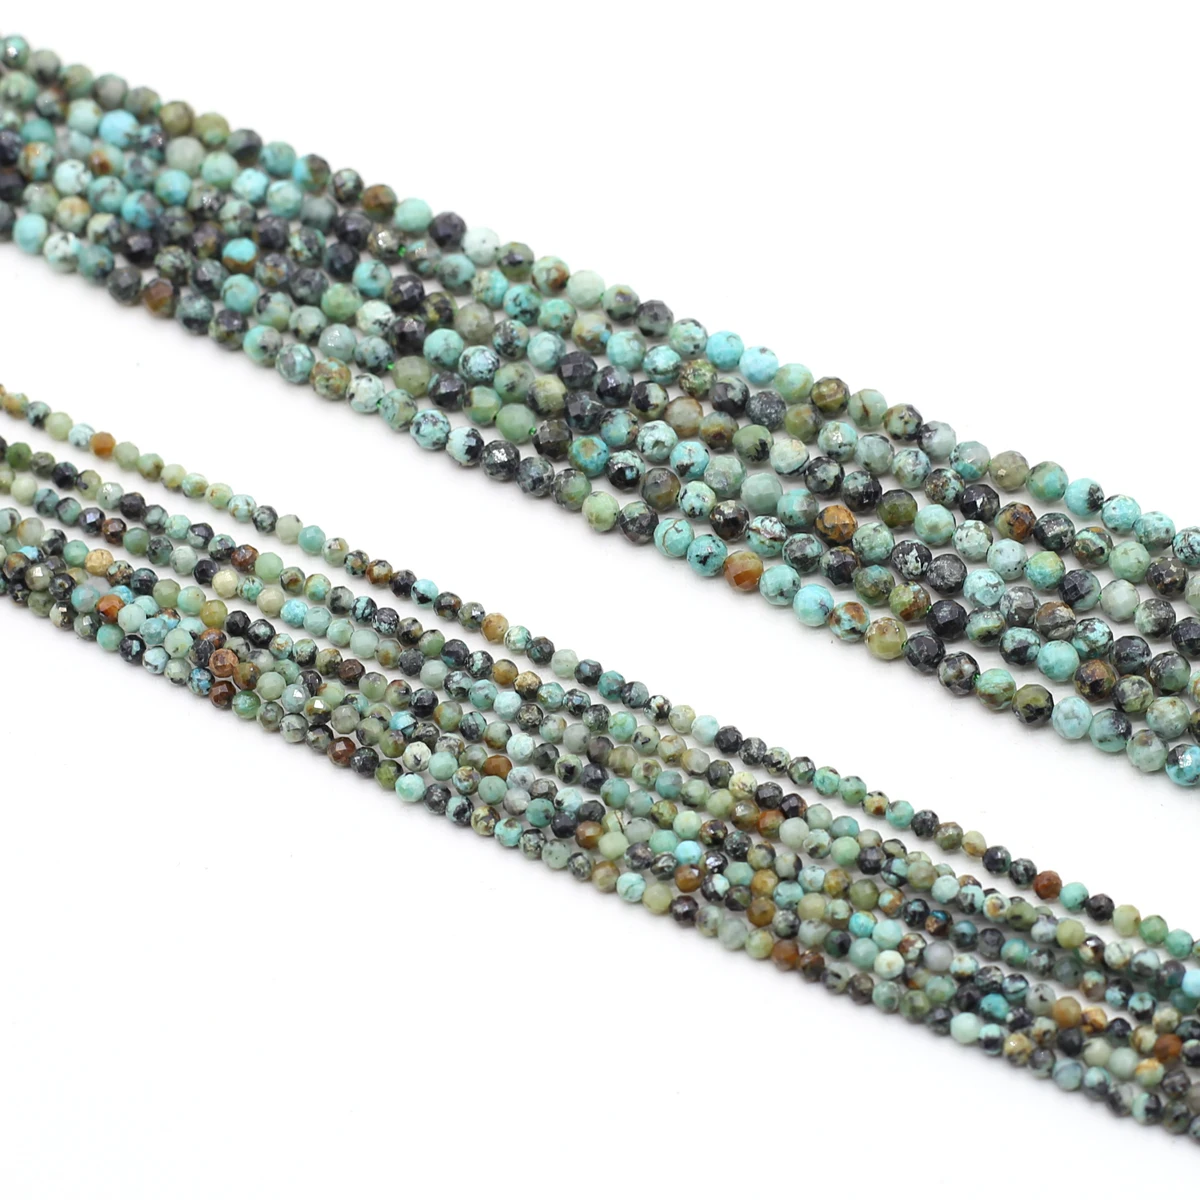 

Round African Turquoise Beads Faceted Natural Stones Loose Spacer Beads for Jewelry Making DIY Necklace Accessories Crafts 38cm